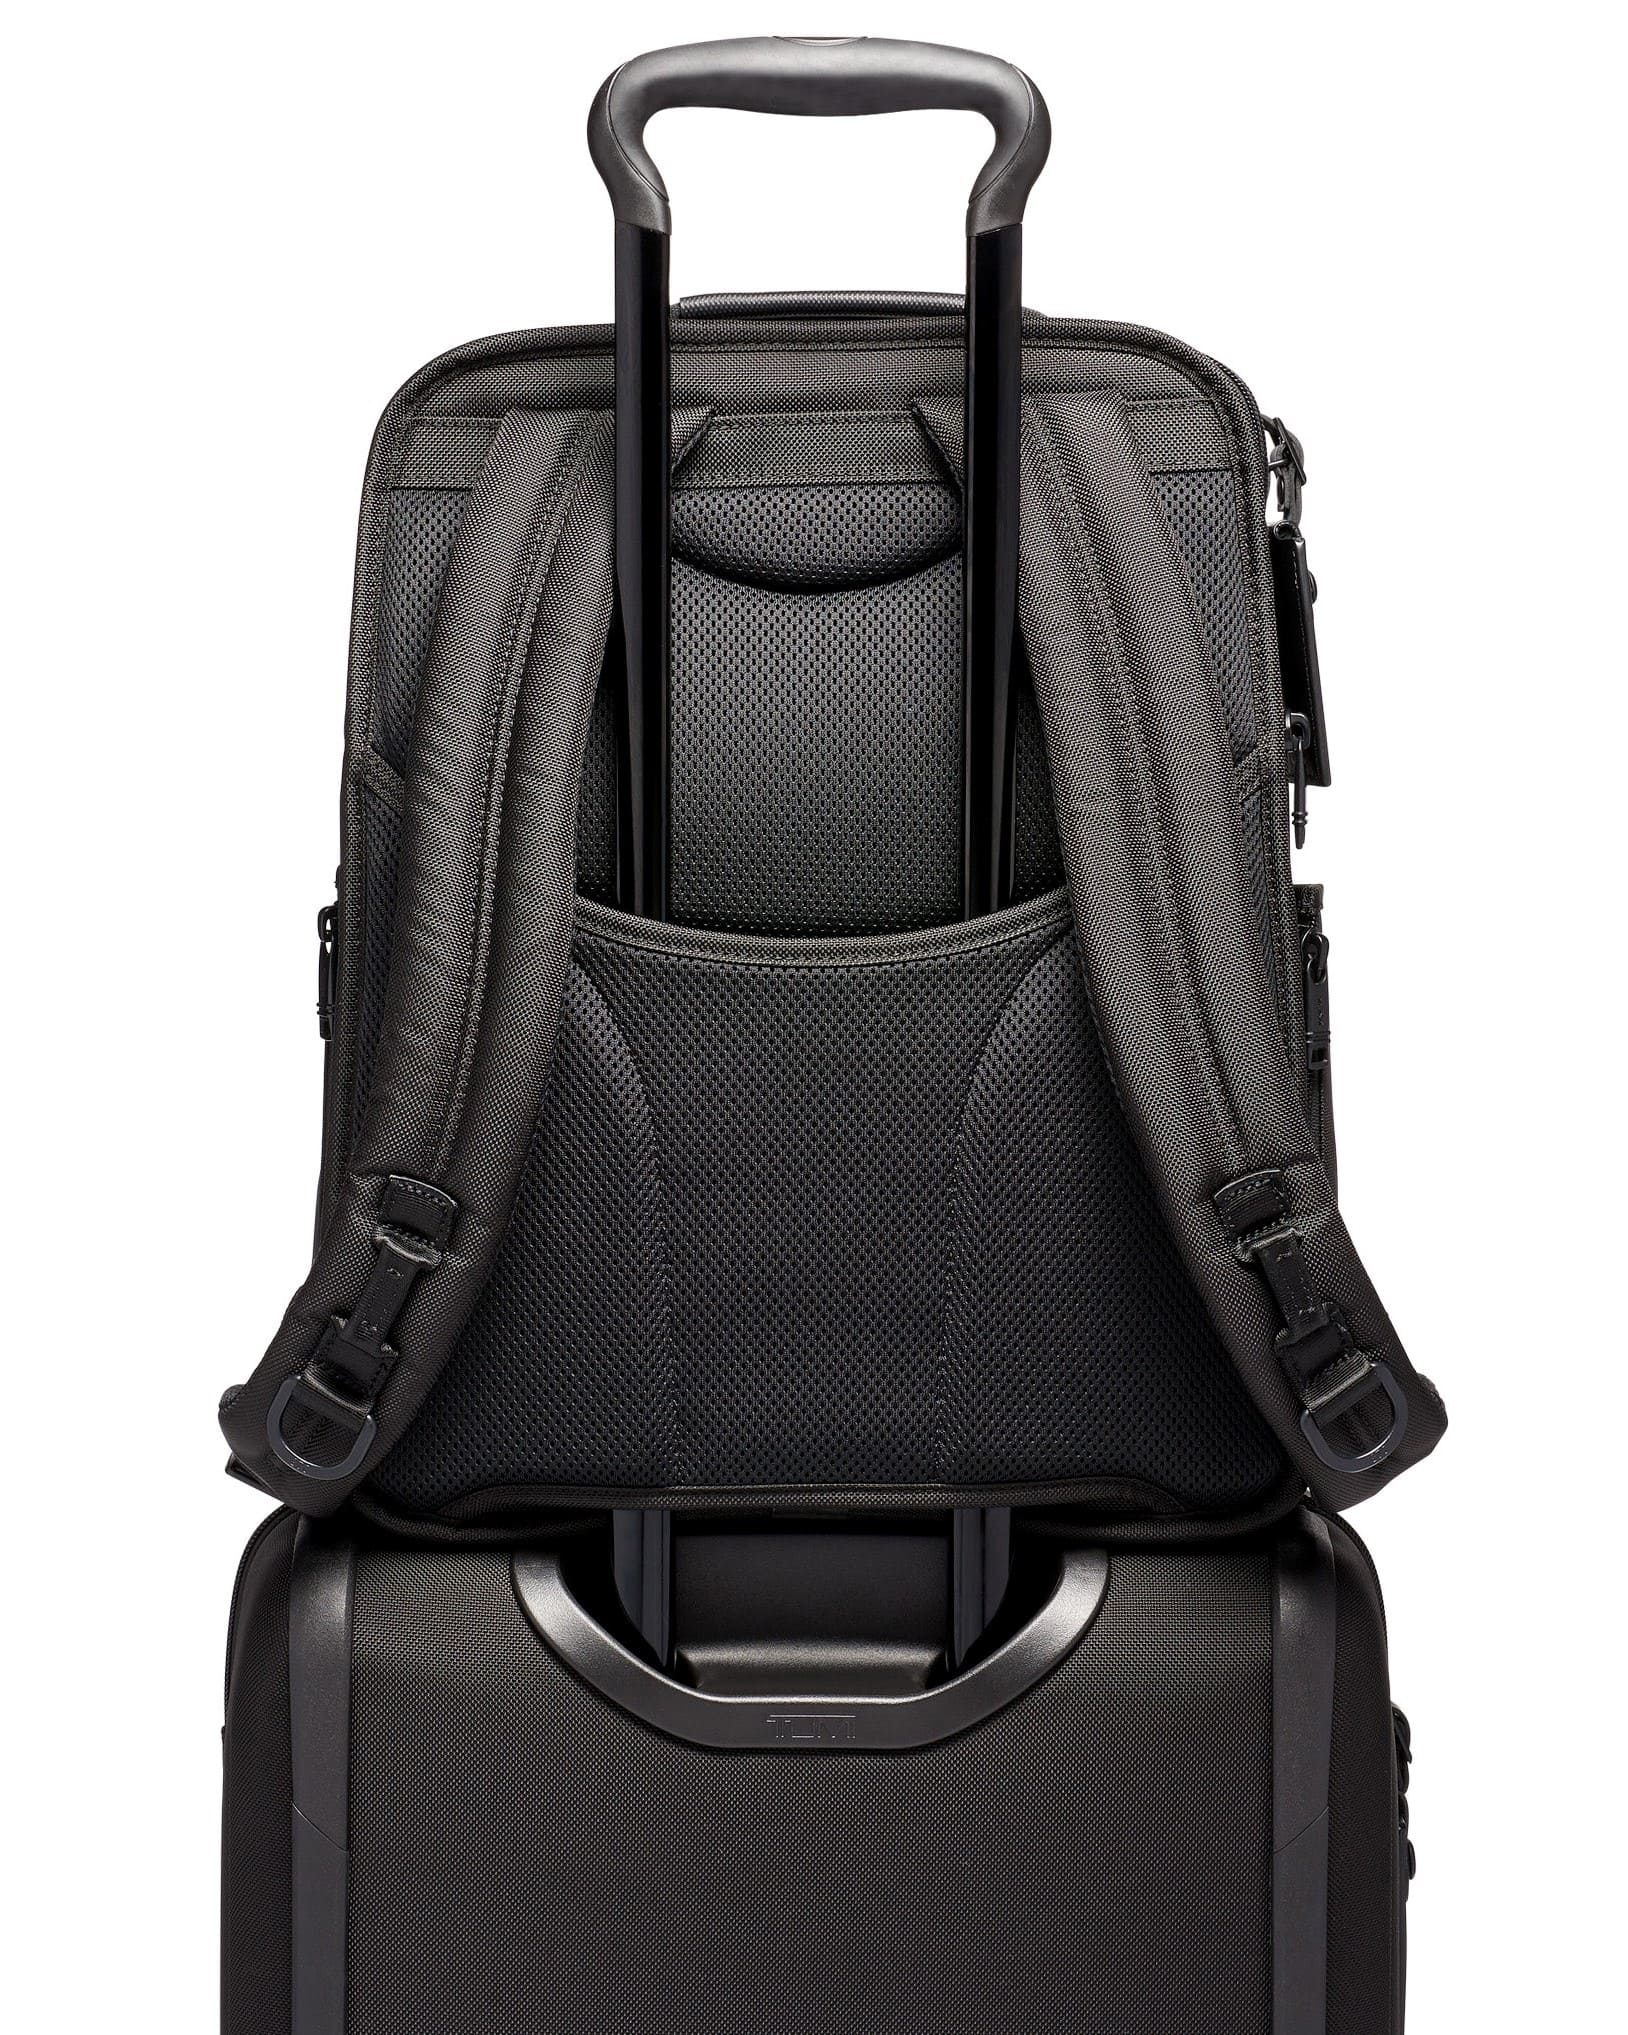 BALO LAPTOP TUMI ALPHA SLIM SOLUTIONS BRIEF PACK BACKPACK 5